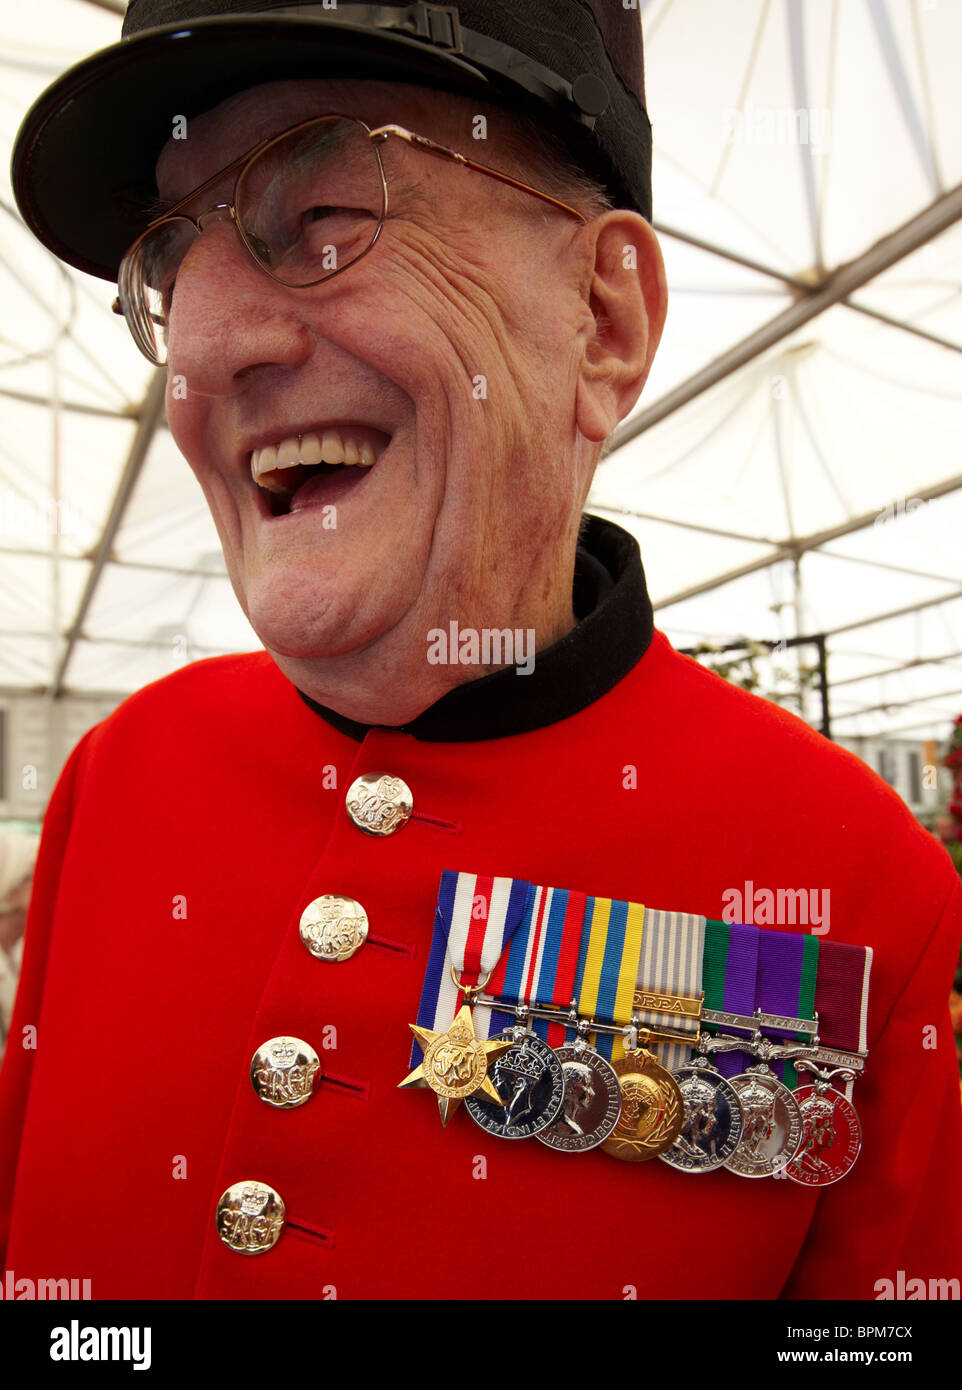 War Medals On The Red Tunic Of A Chelsea Pensioner Chelsea Flower Show London Europe Stock Photo